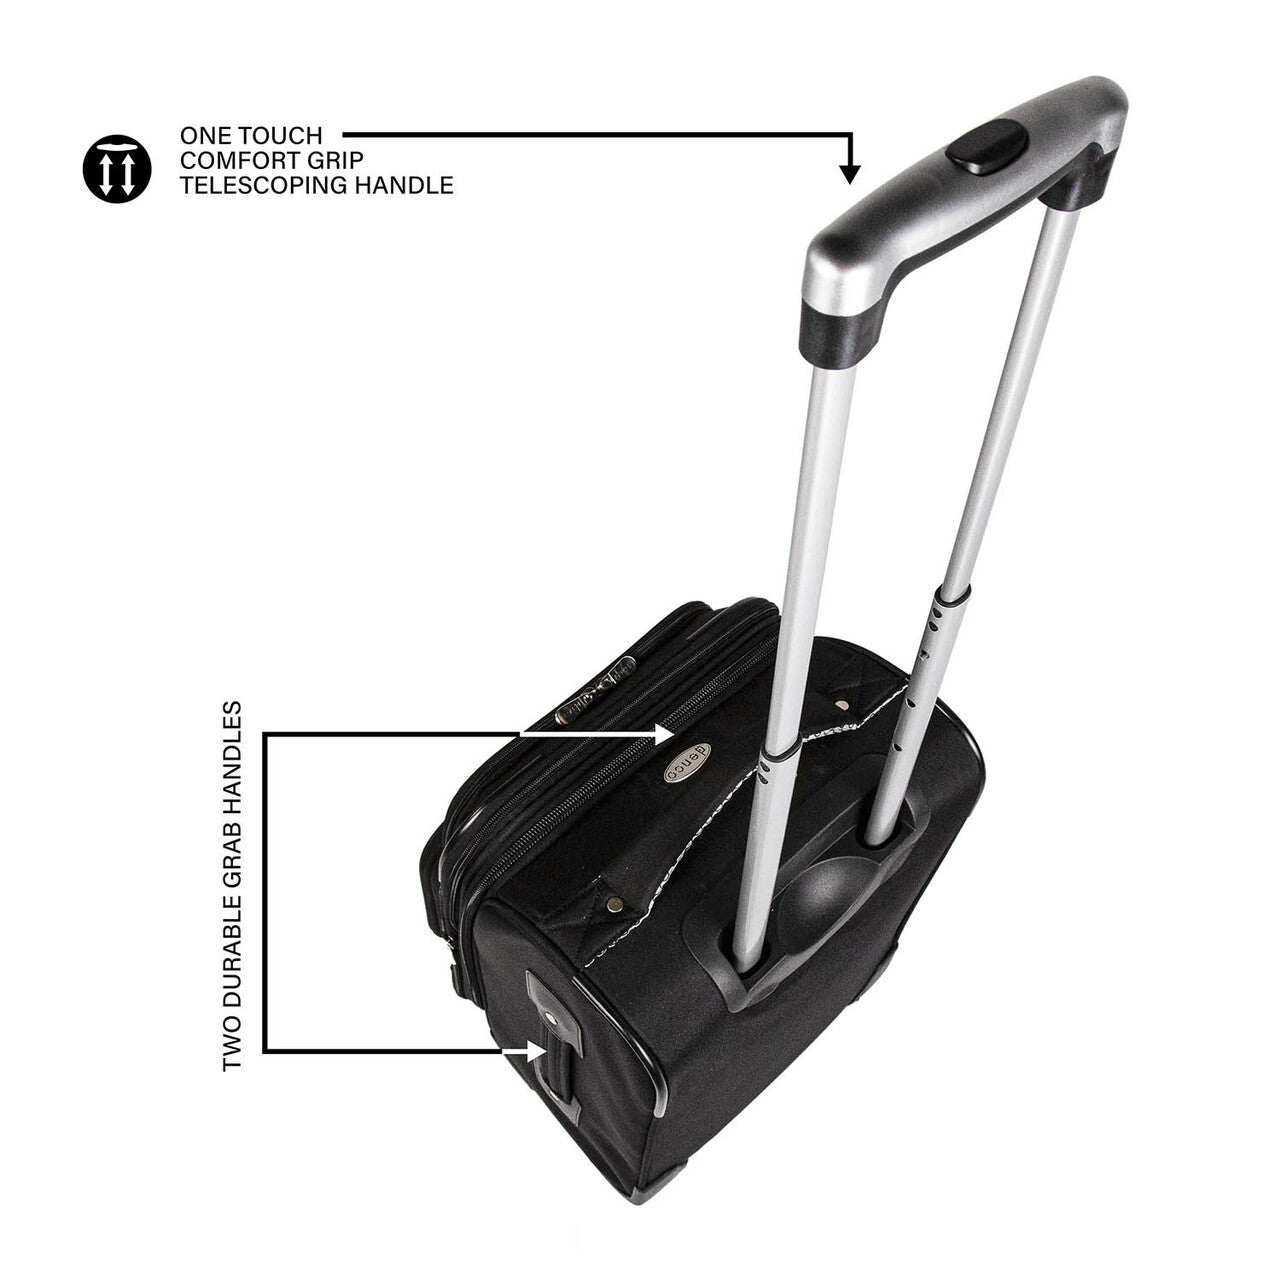 20'' Black Domestic Soft Side Carry-on Spinner